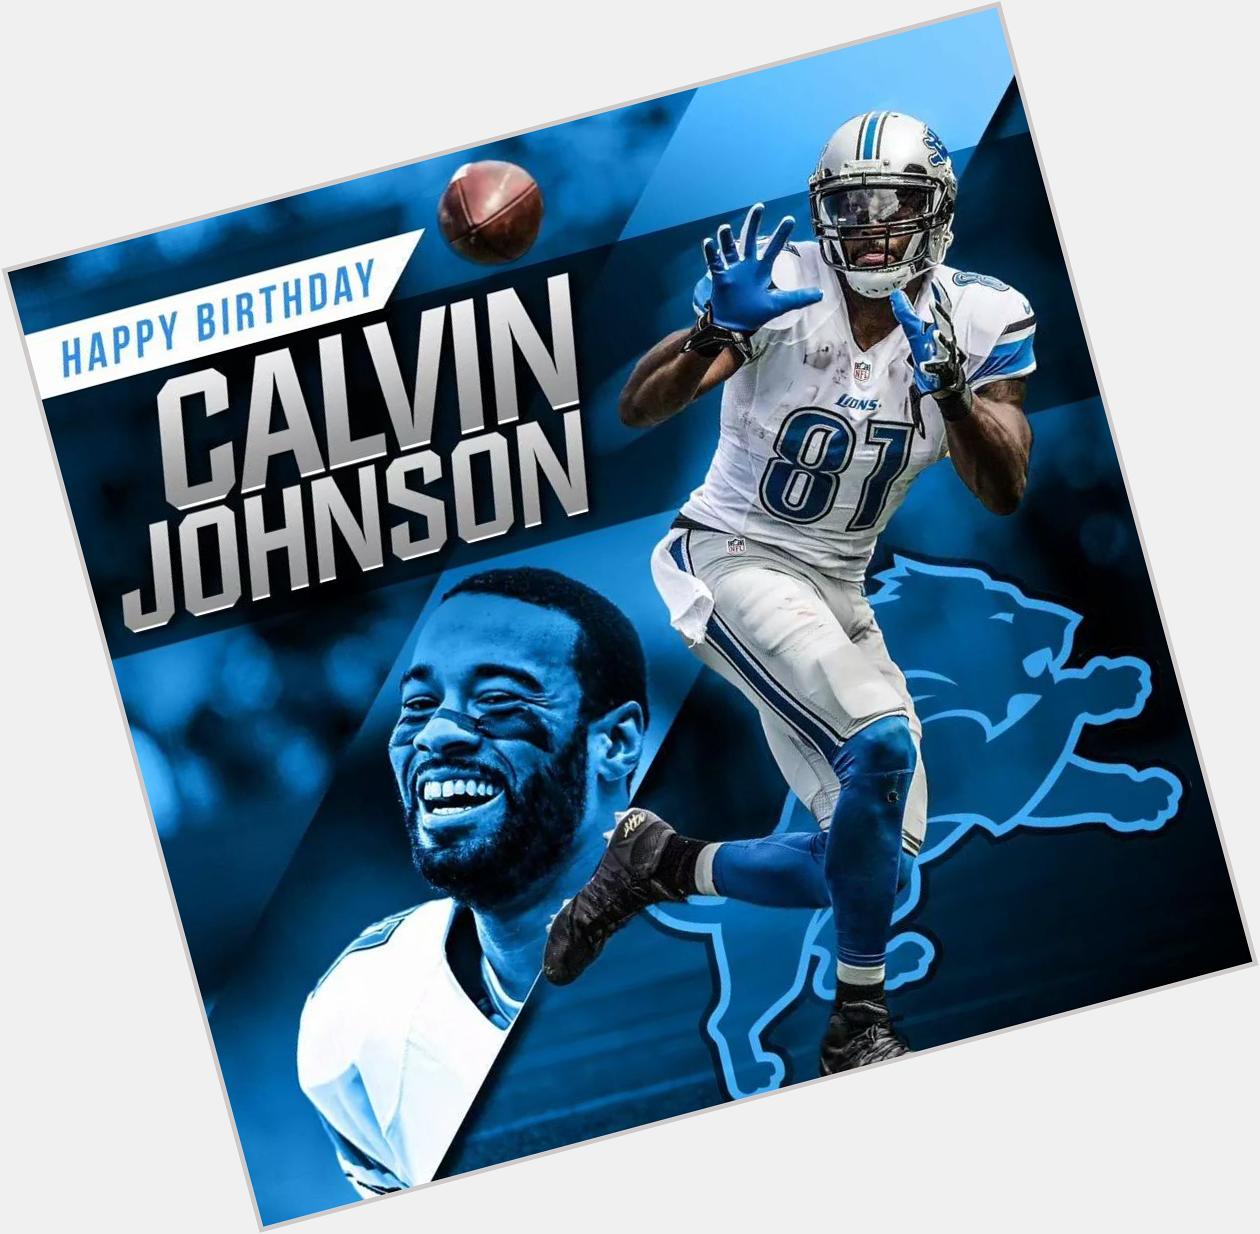 Today the Greatest Of All Time is 30 years old, Happy Birthday Calvin Johnson AKA Megatron 